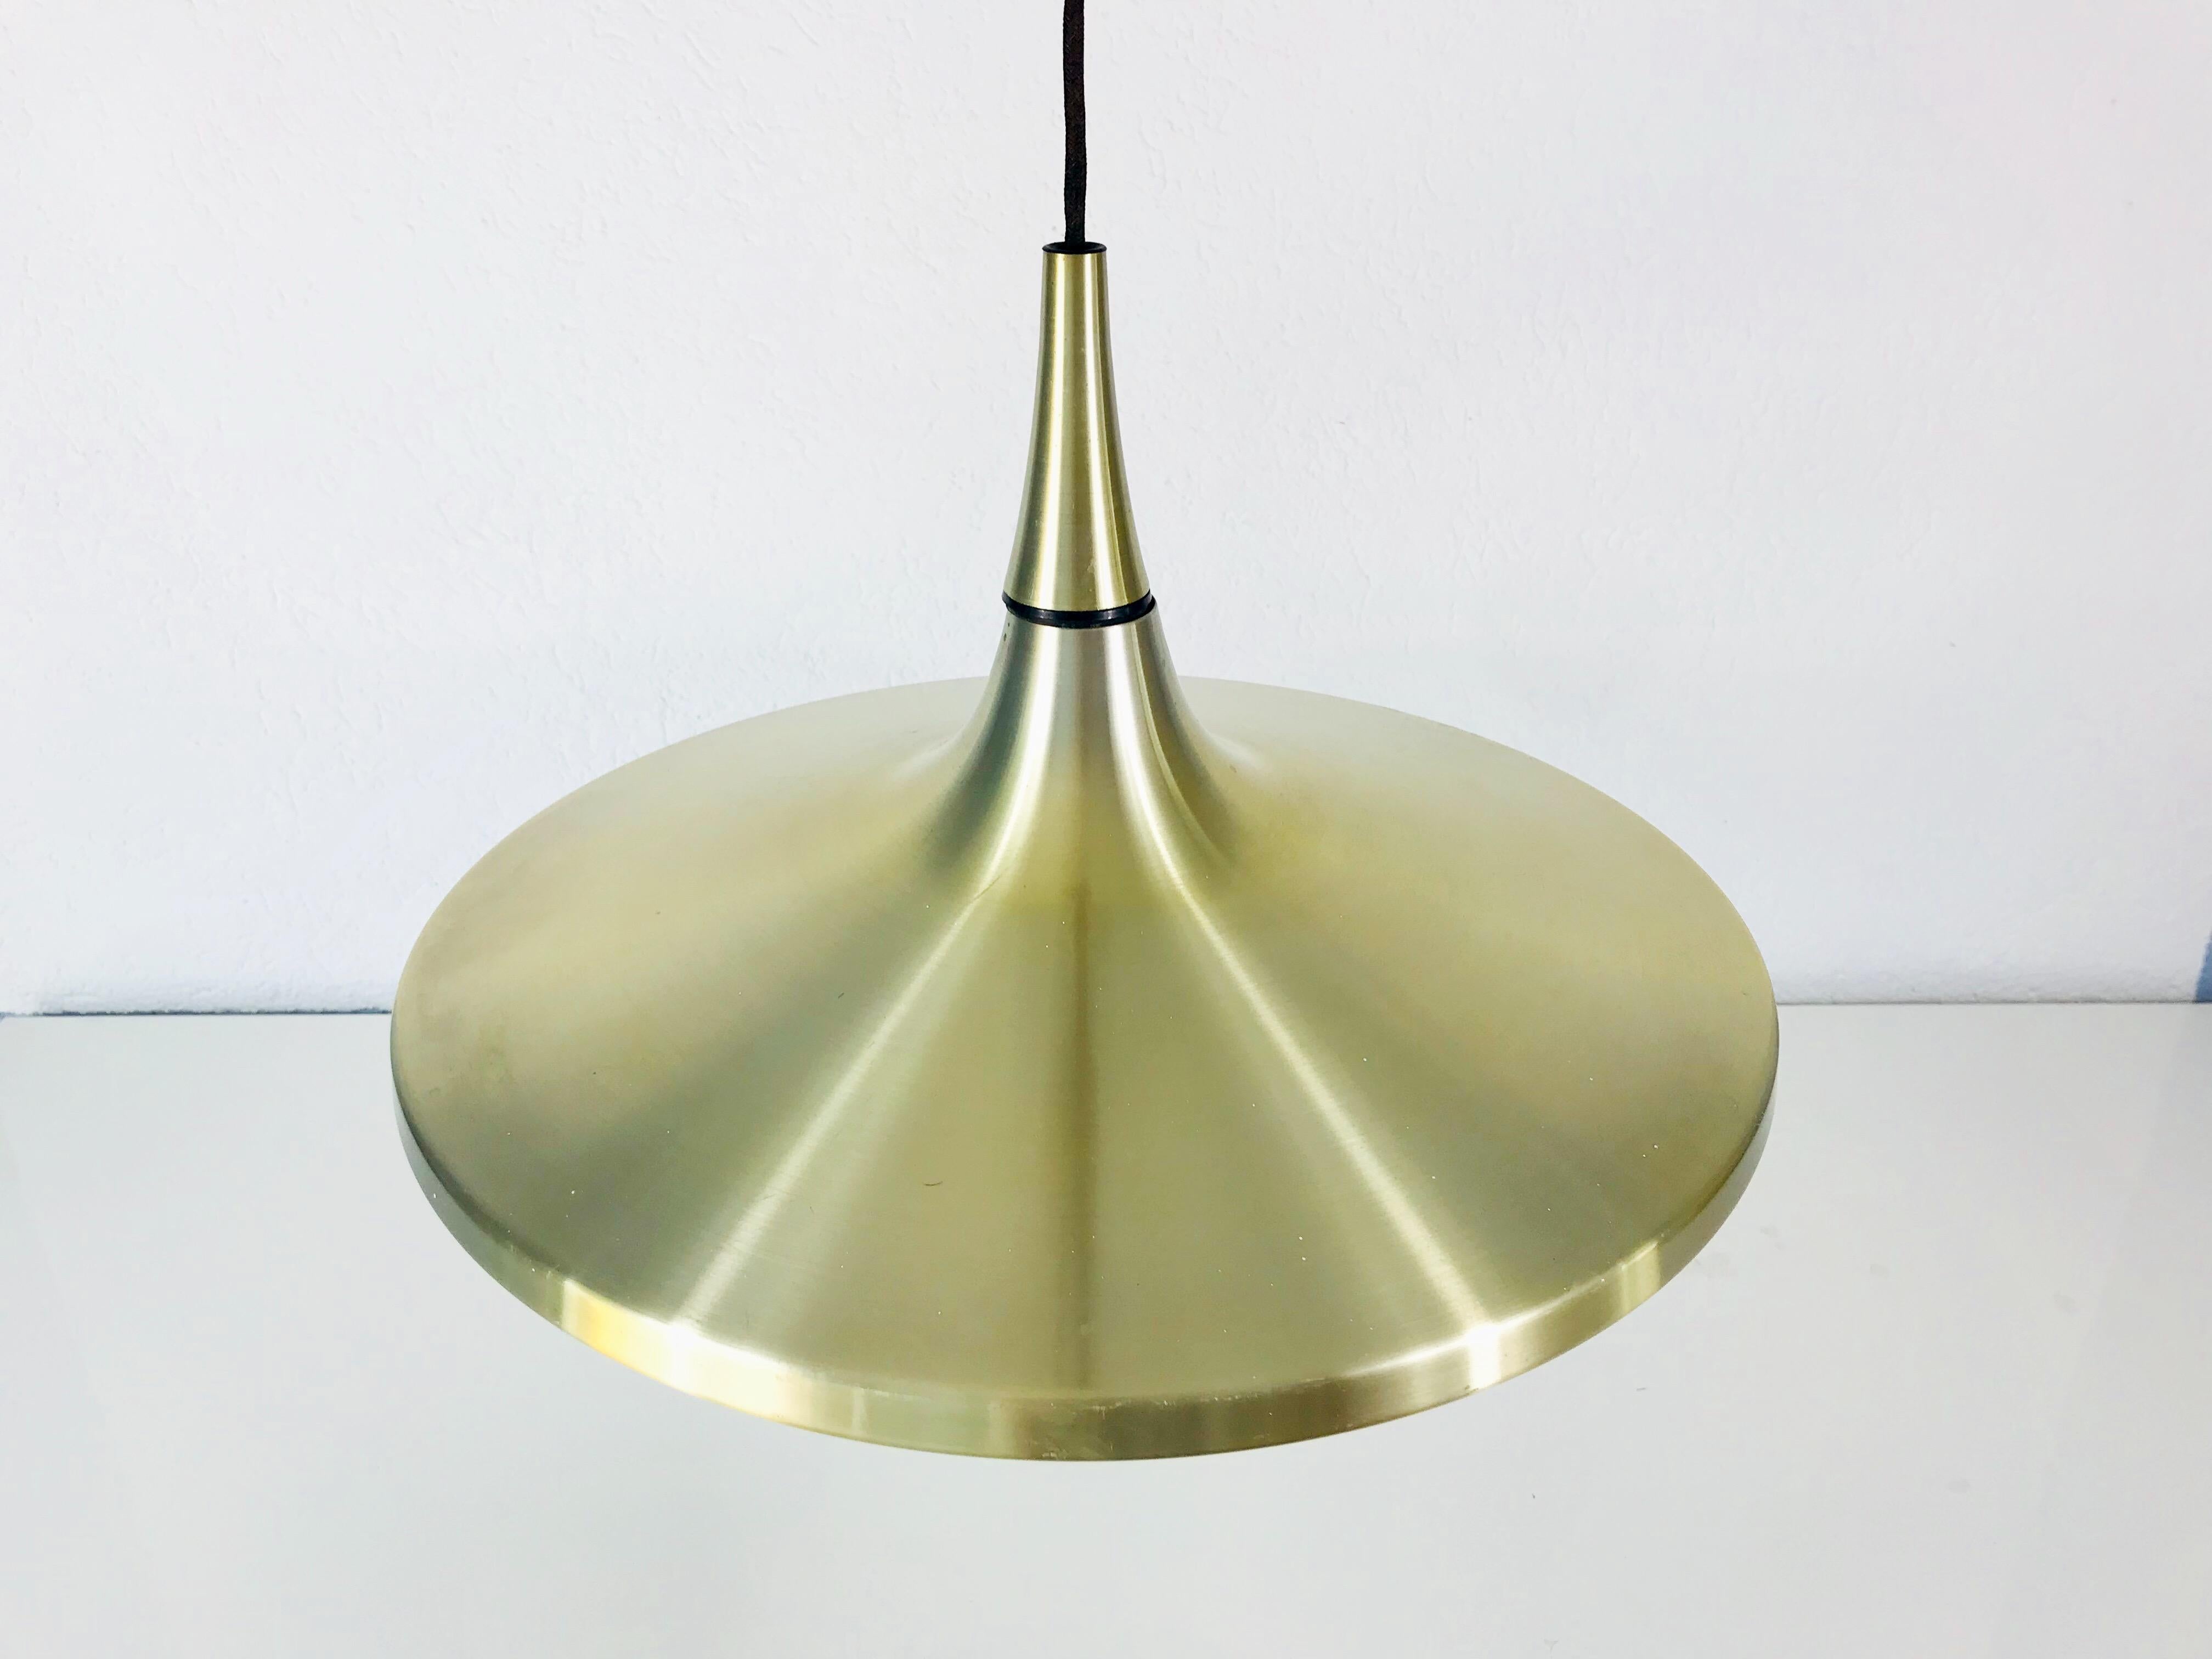 German Counterweight Pendant Lamp by Erco, 1970s